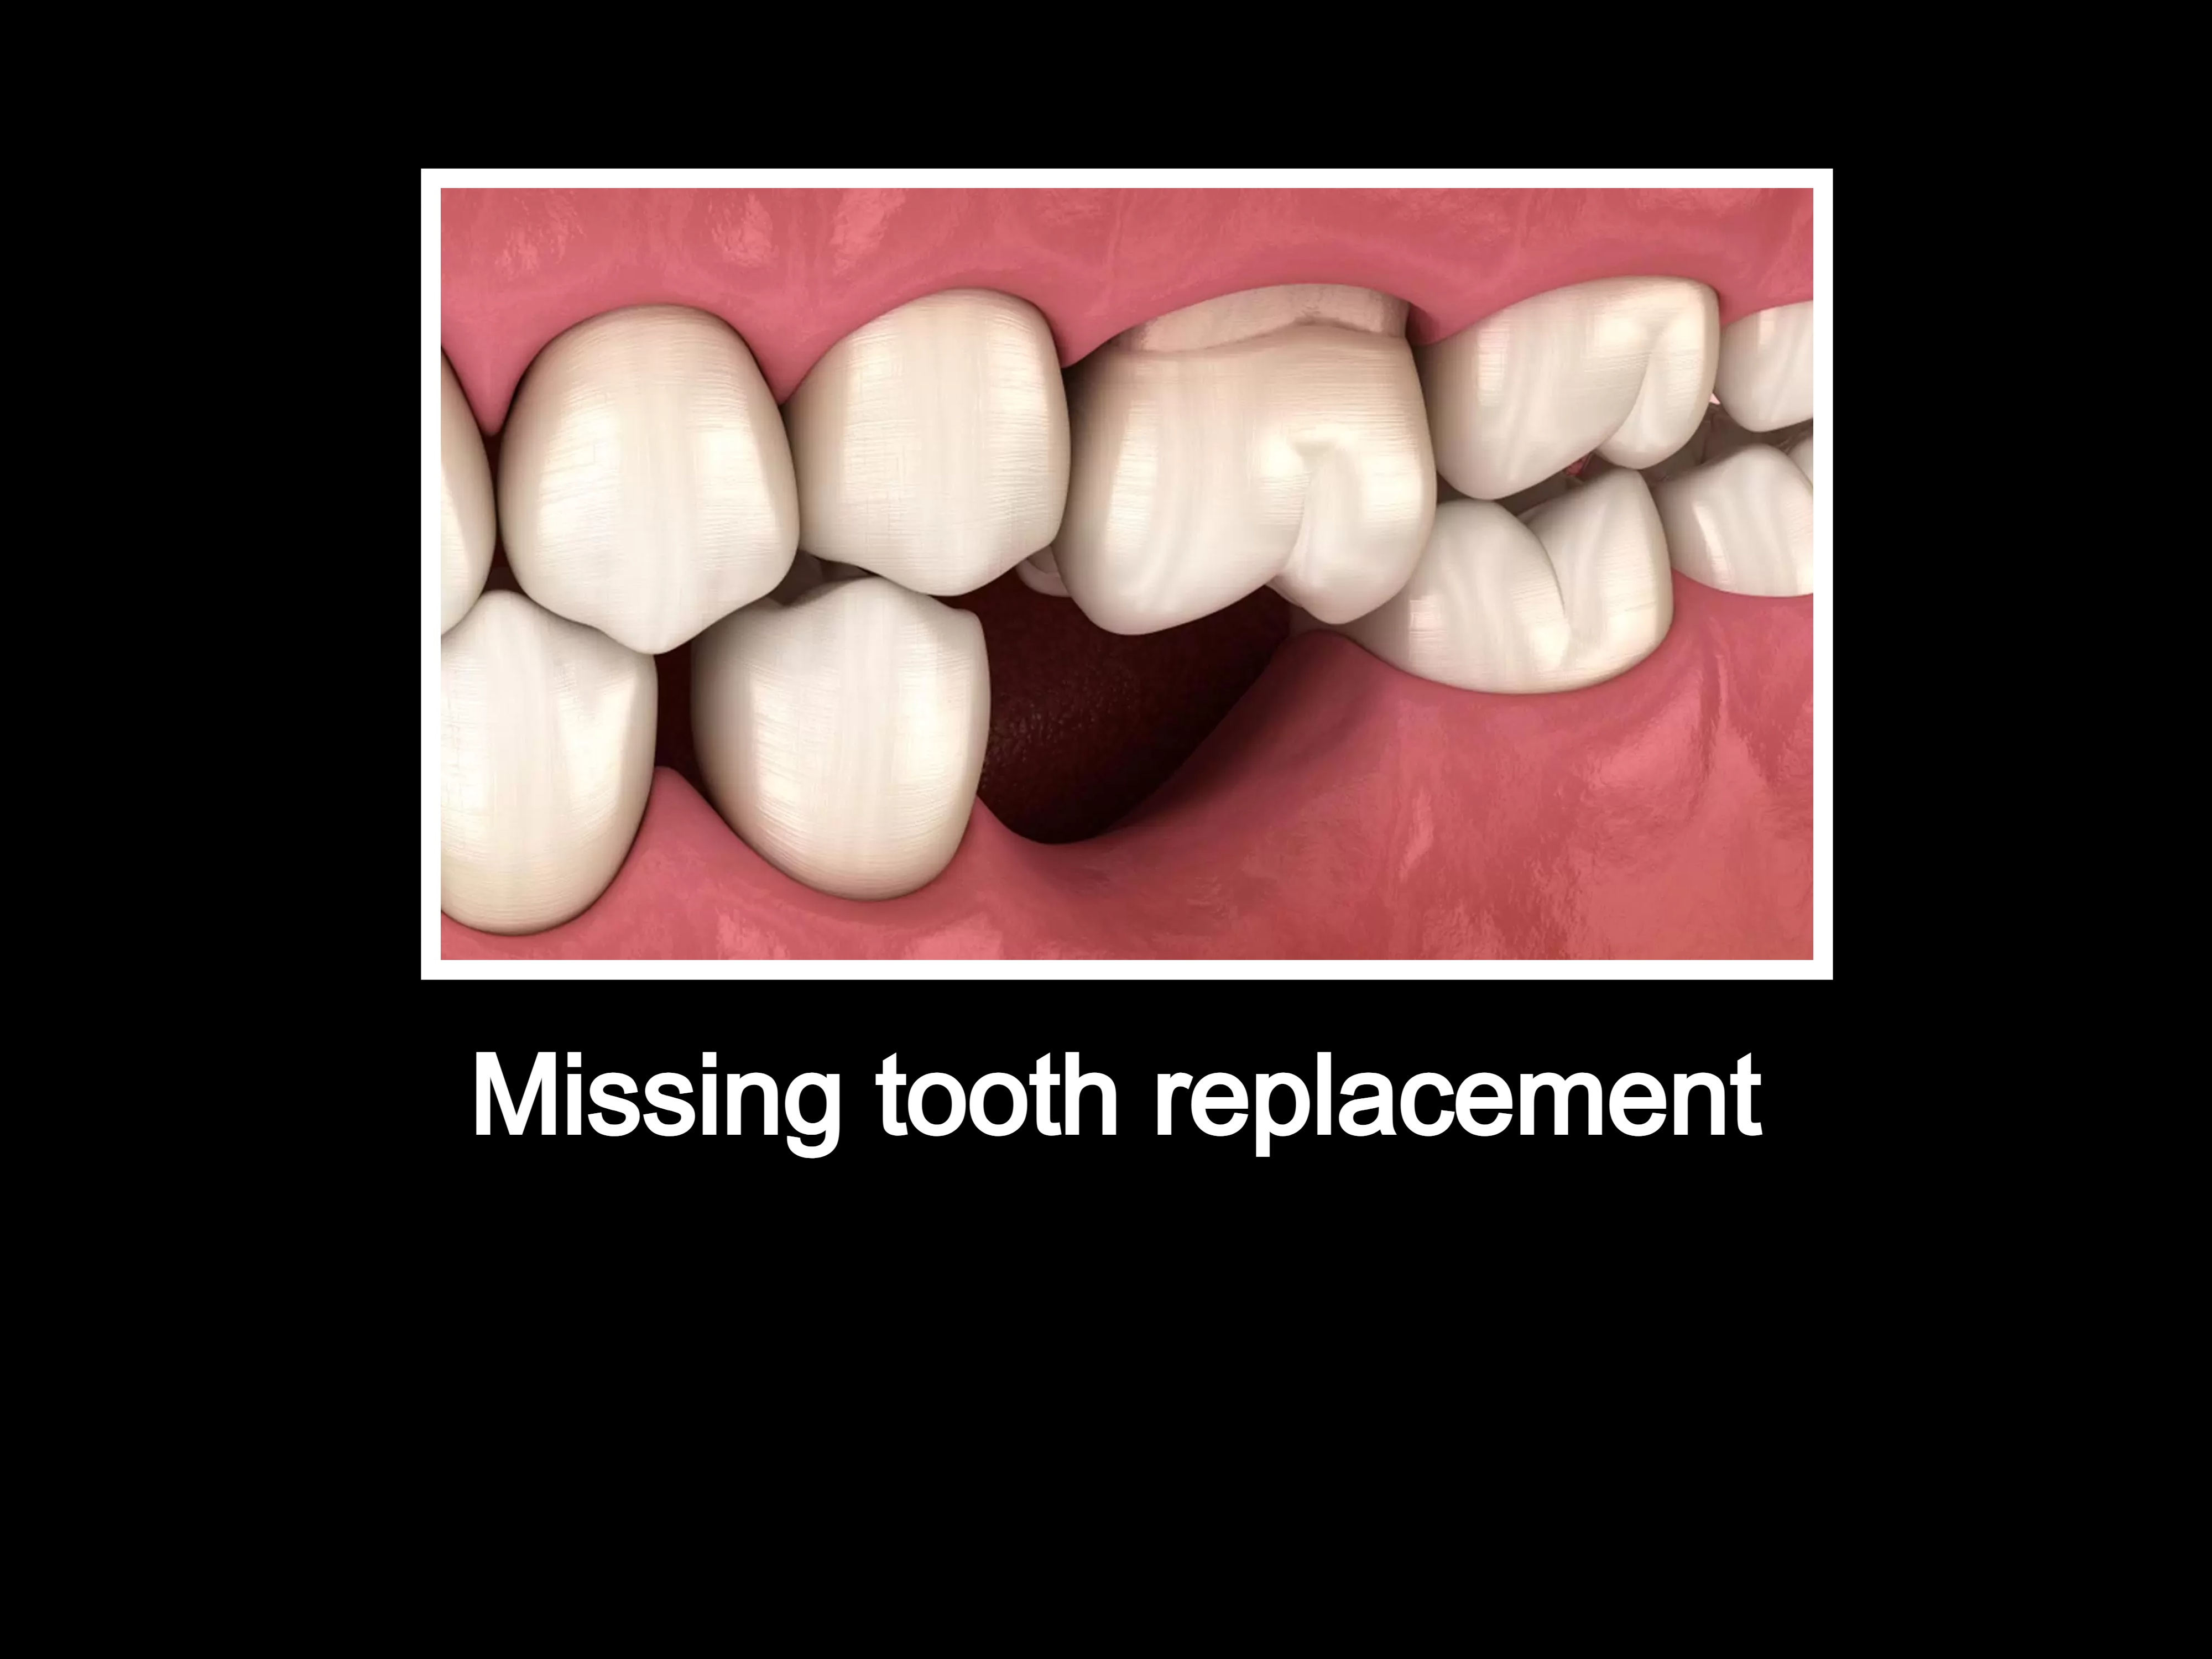 Missing tooth replacement options, how to replace a fallen tooth